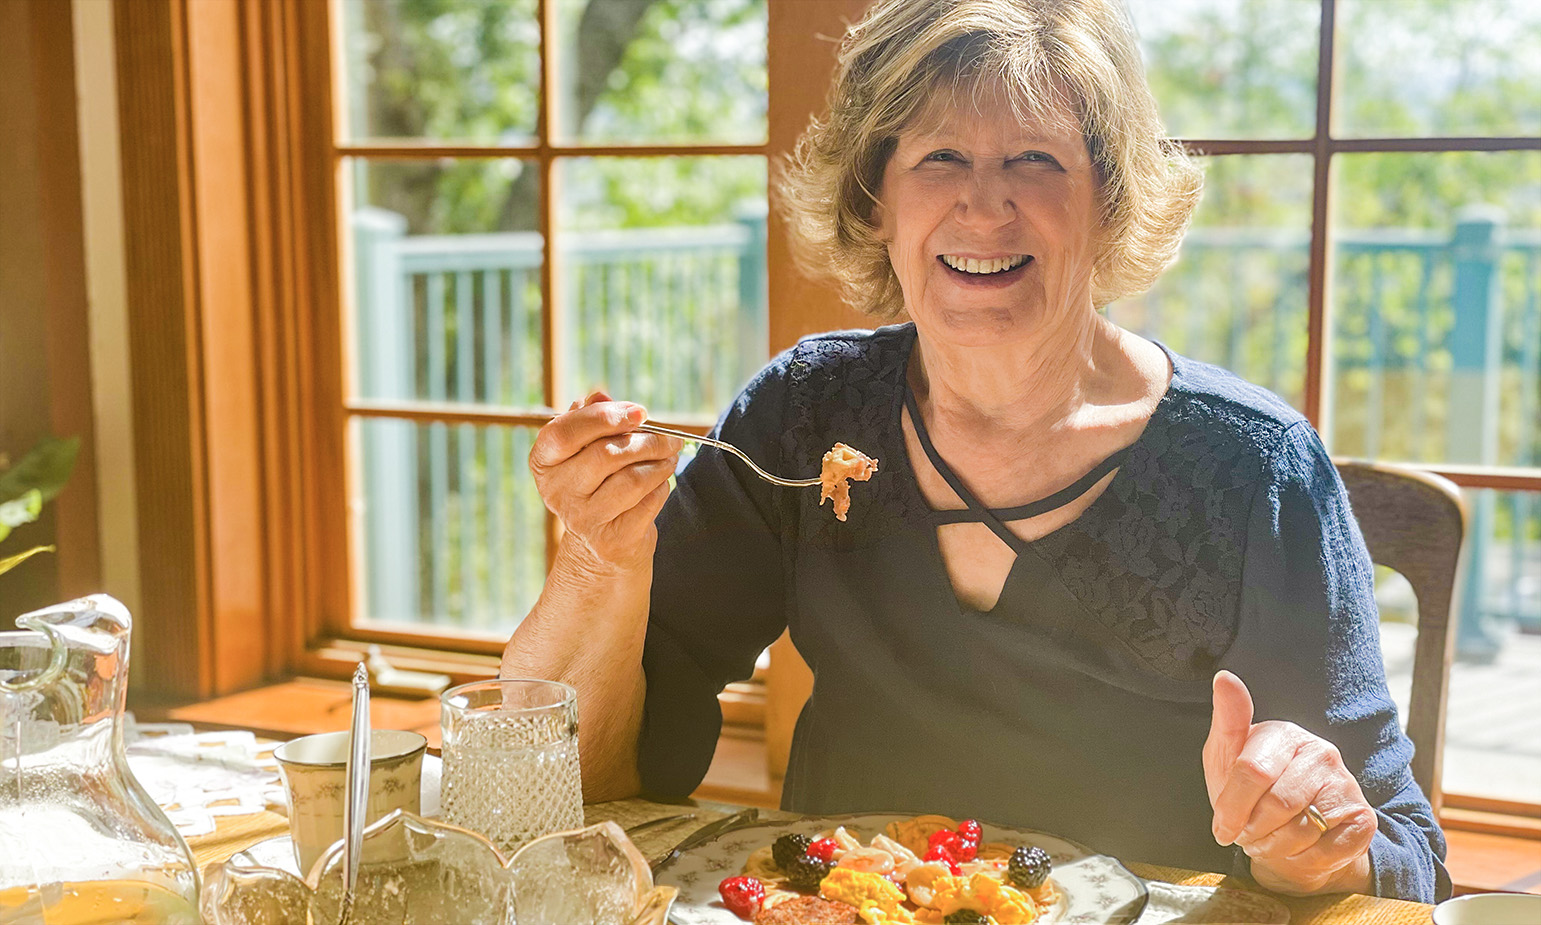 Senior woman enjoying healthy meal at sunlit dining room table at home, picture windows behind her